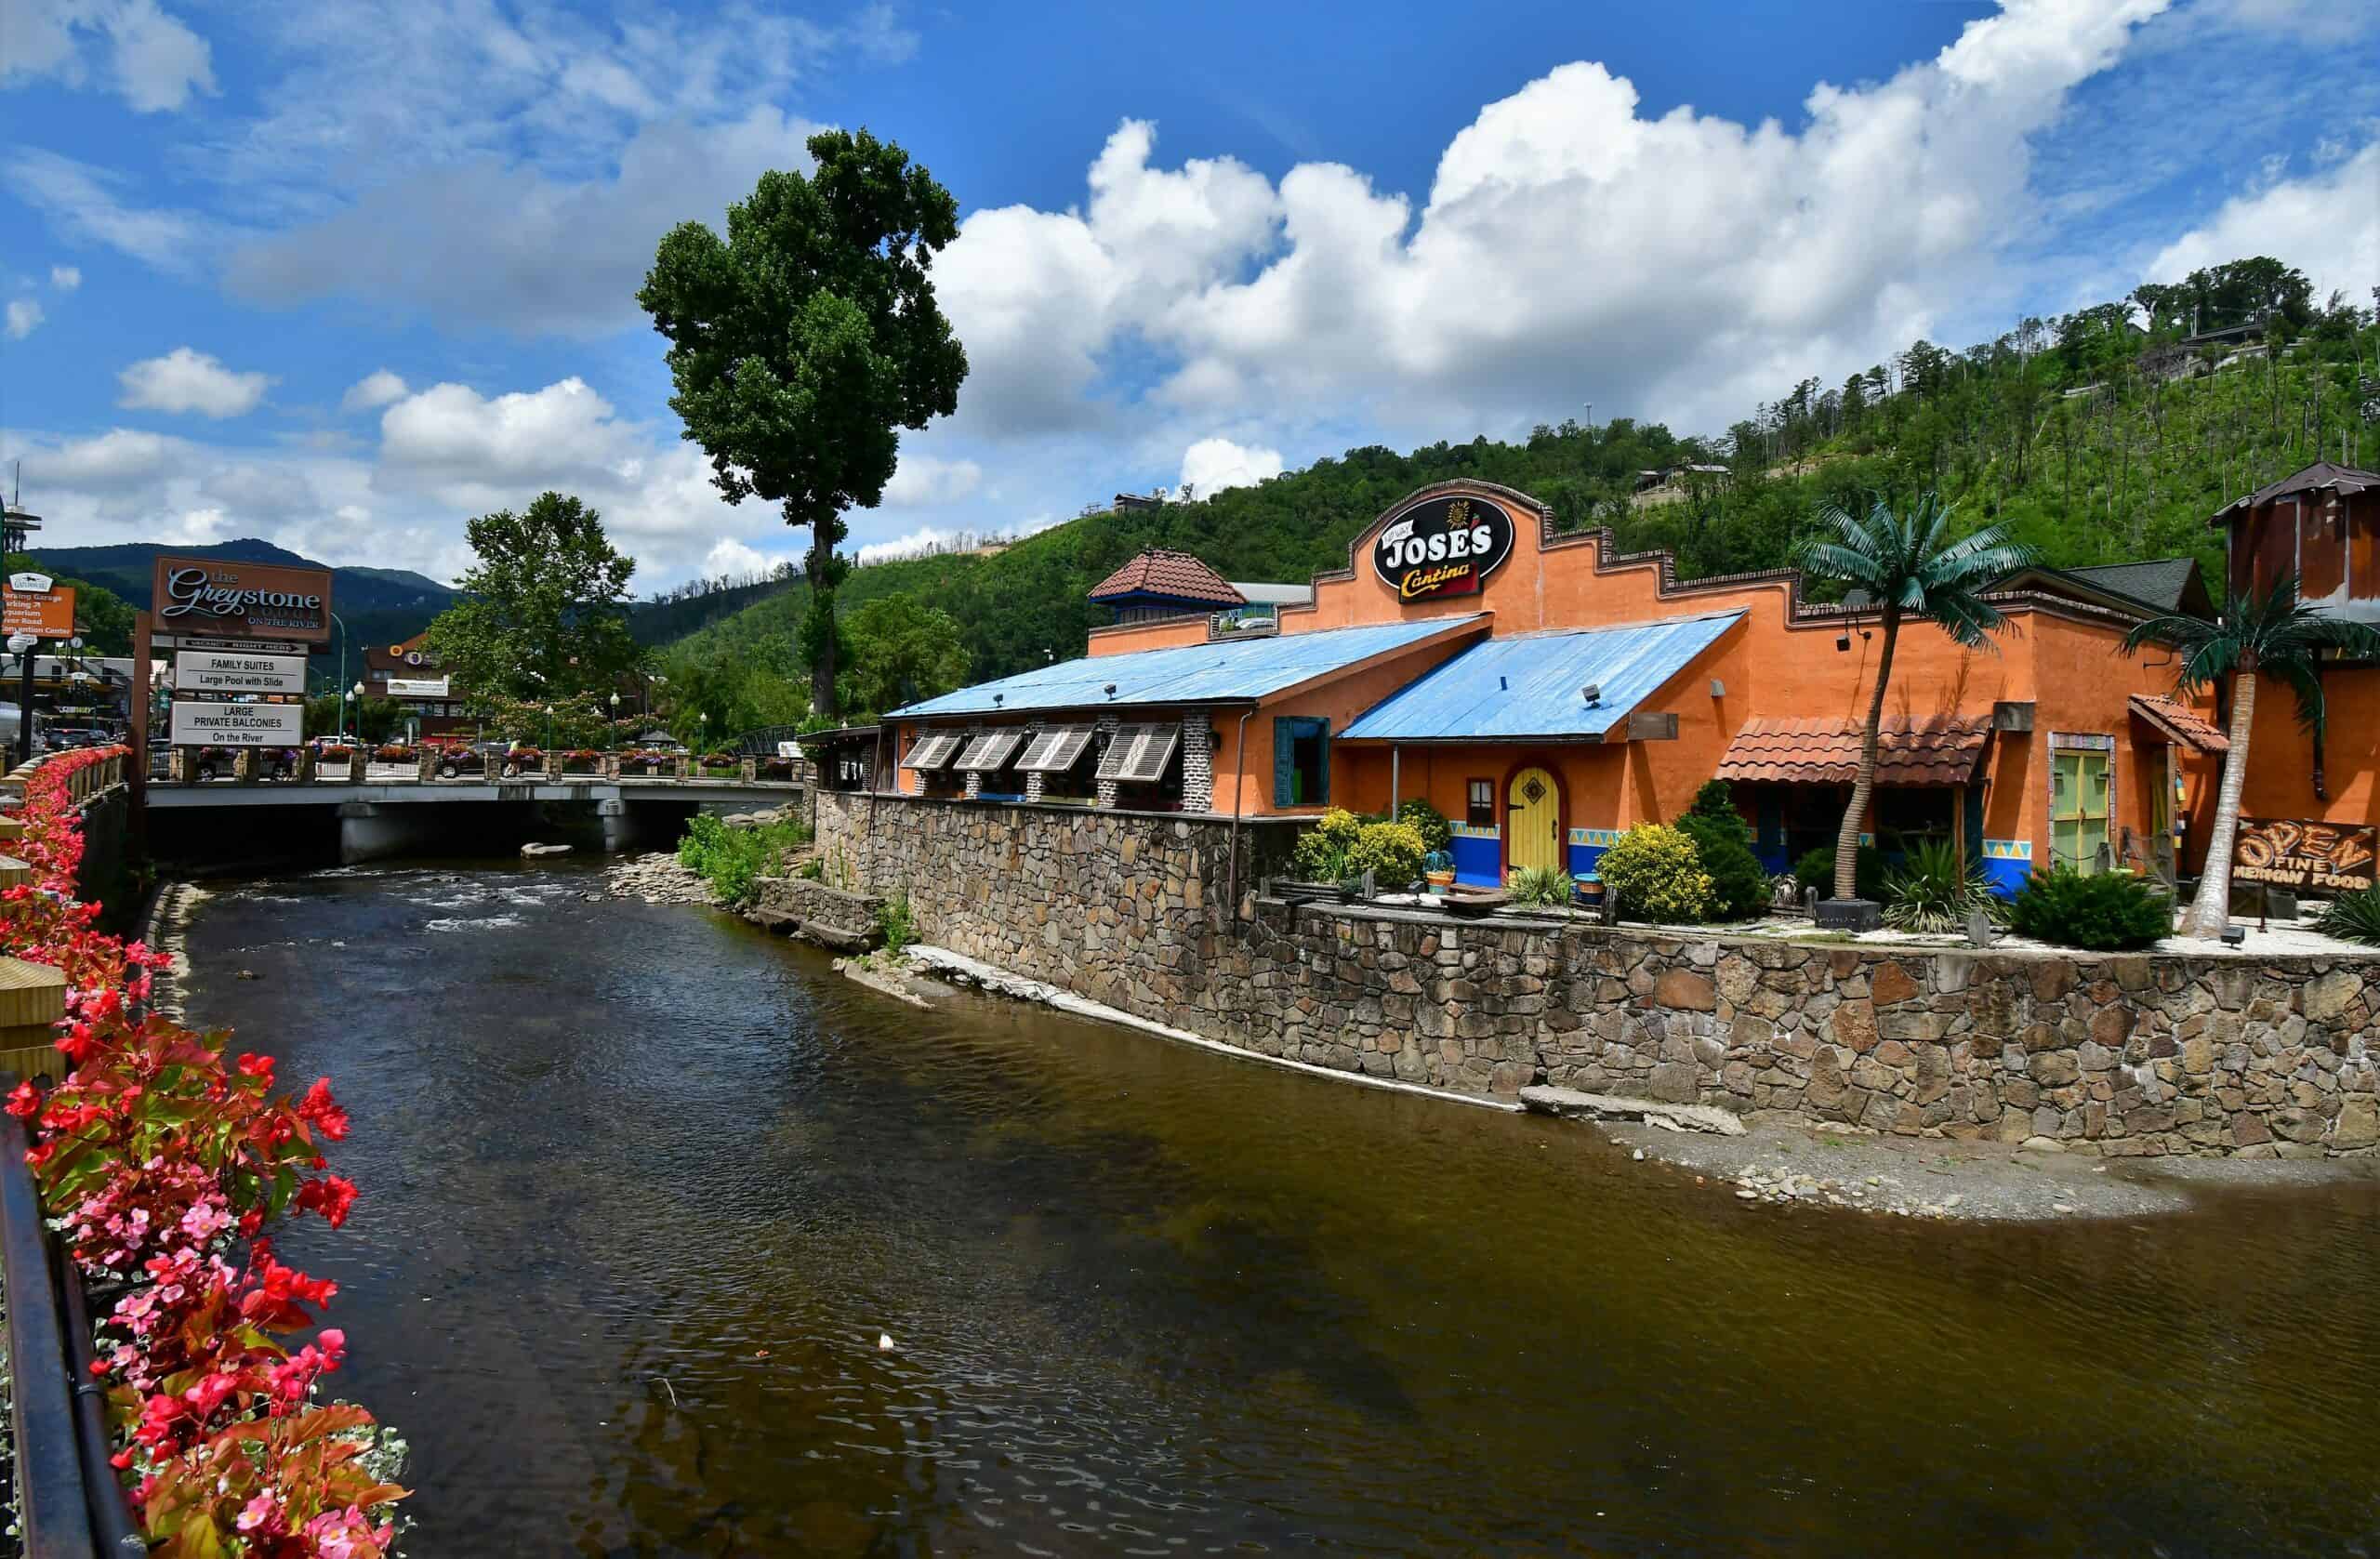 5 Affordable Places to Eat in Gatlinburg TN